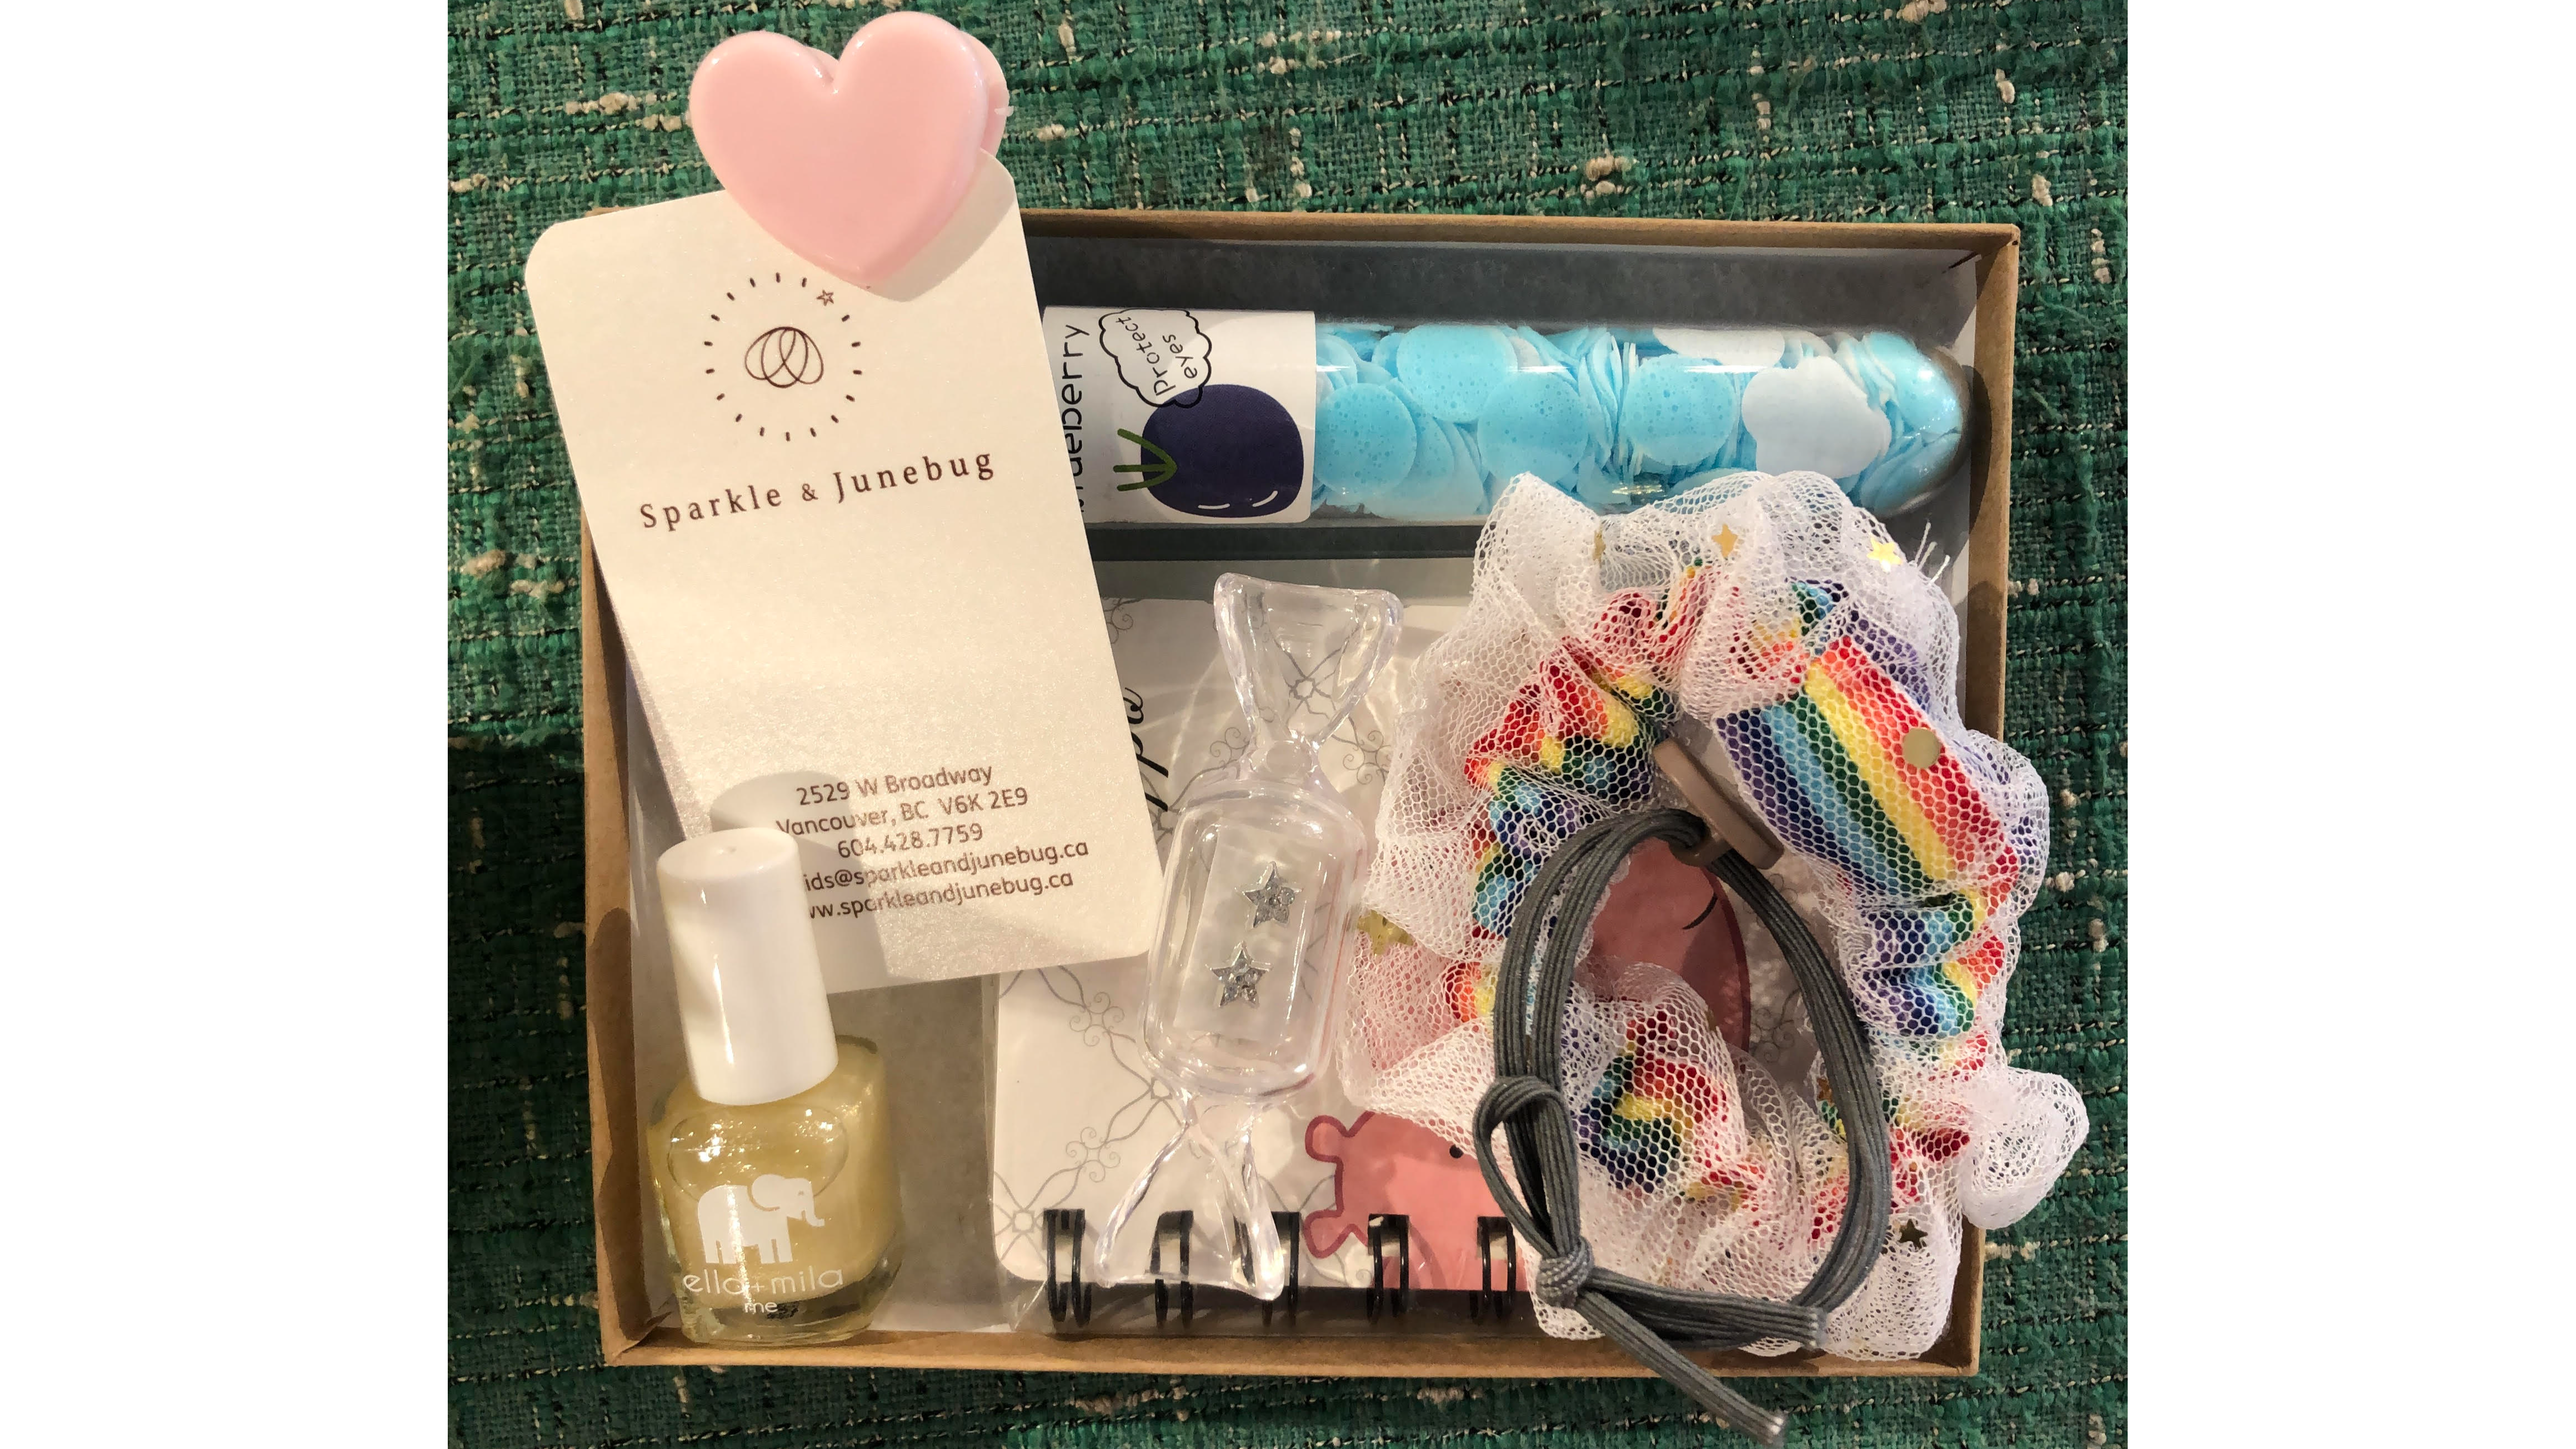 A gift box from Sparkle & Junebug